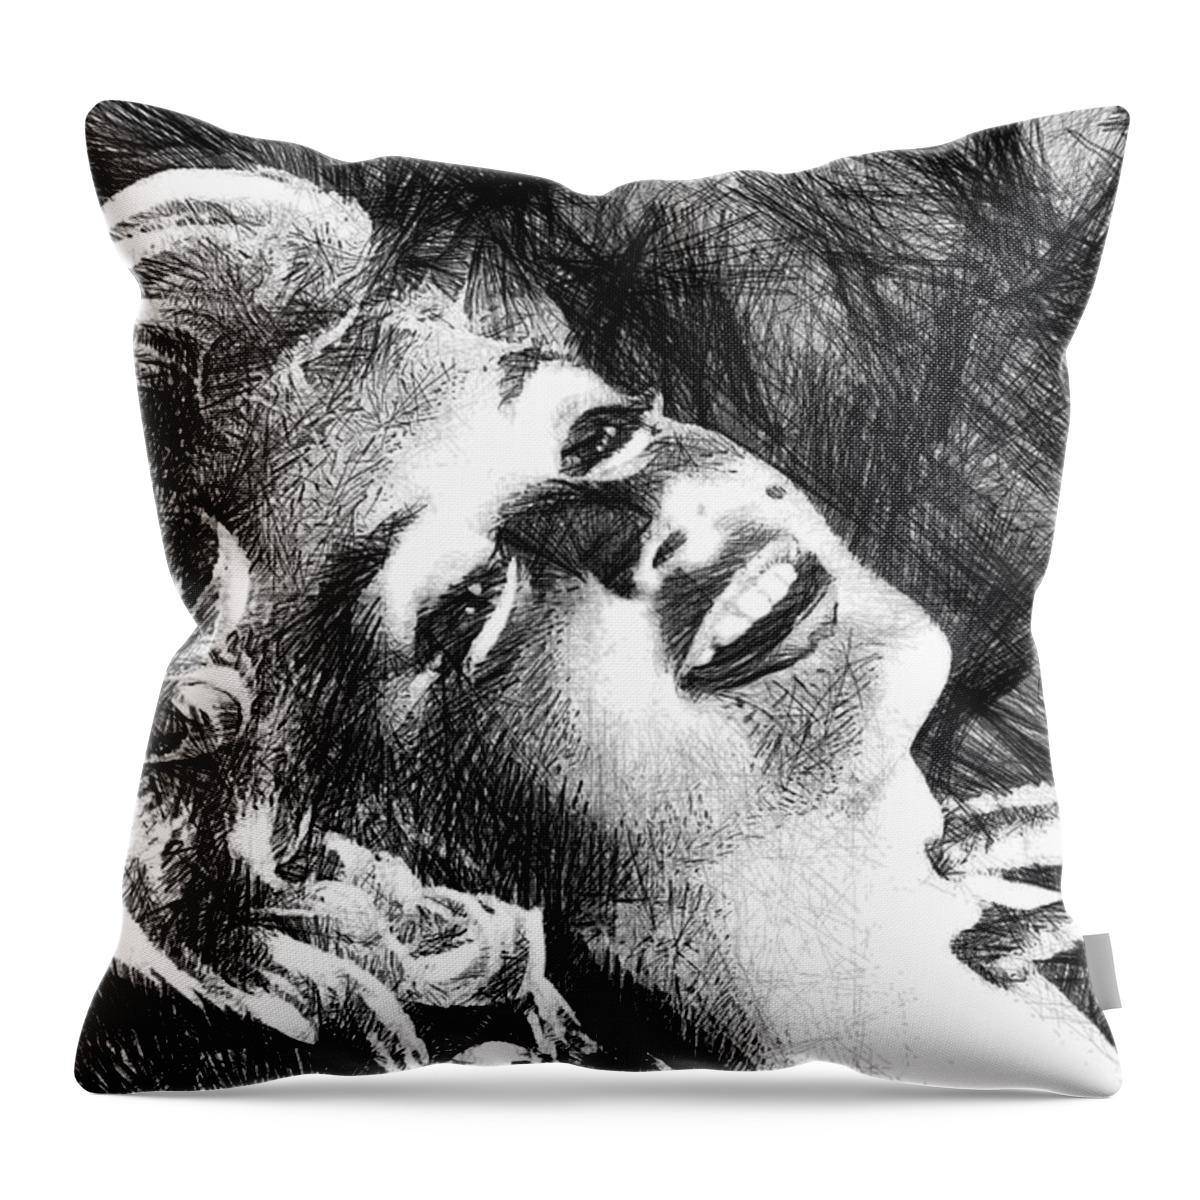 Lover Throw Pillow featuring the digital art Real Lover by Rafael Salazar